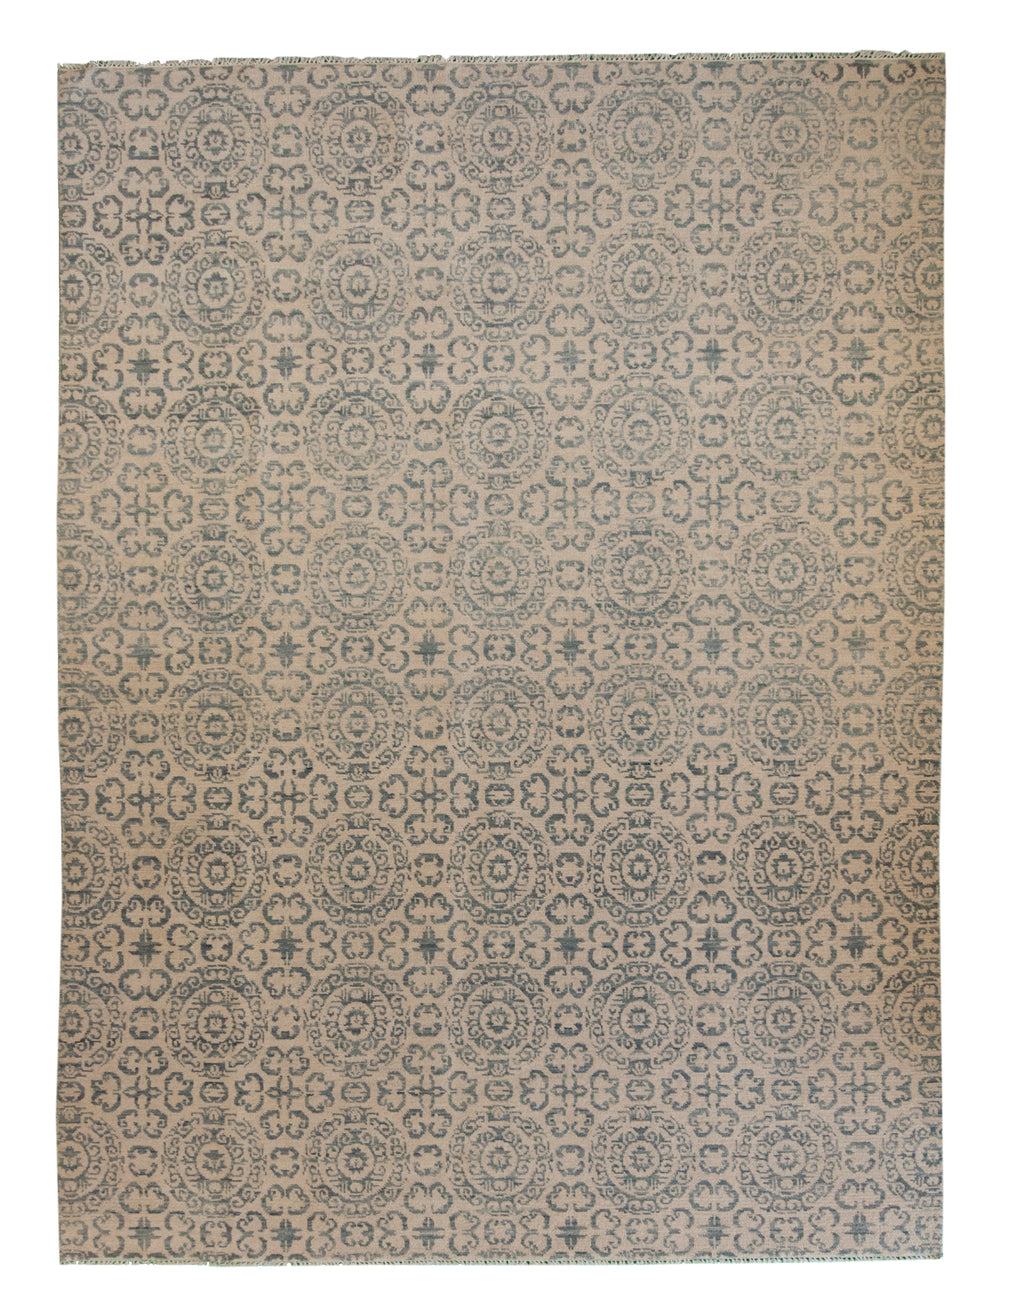 Ganga Collection Beige 9x12 On Sale 50% Off